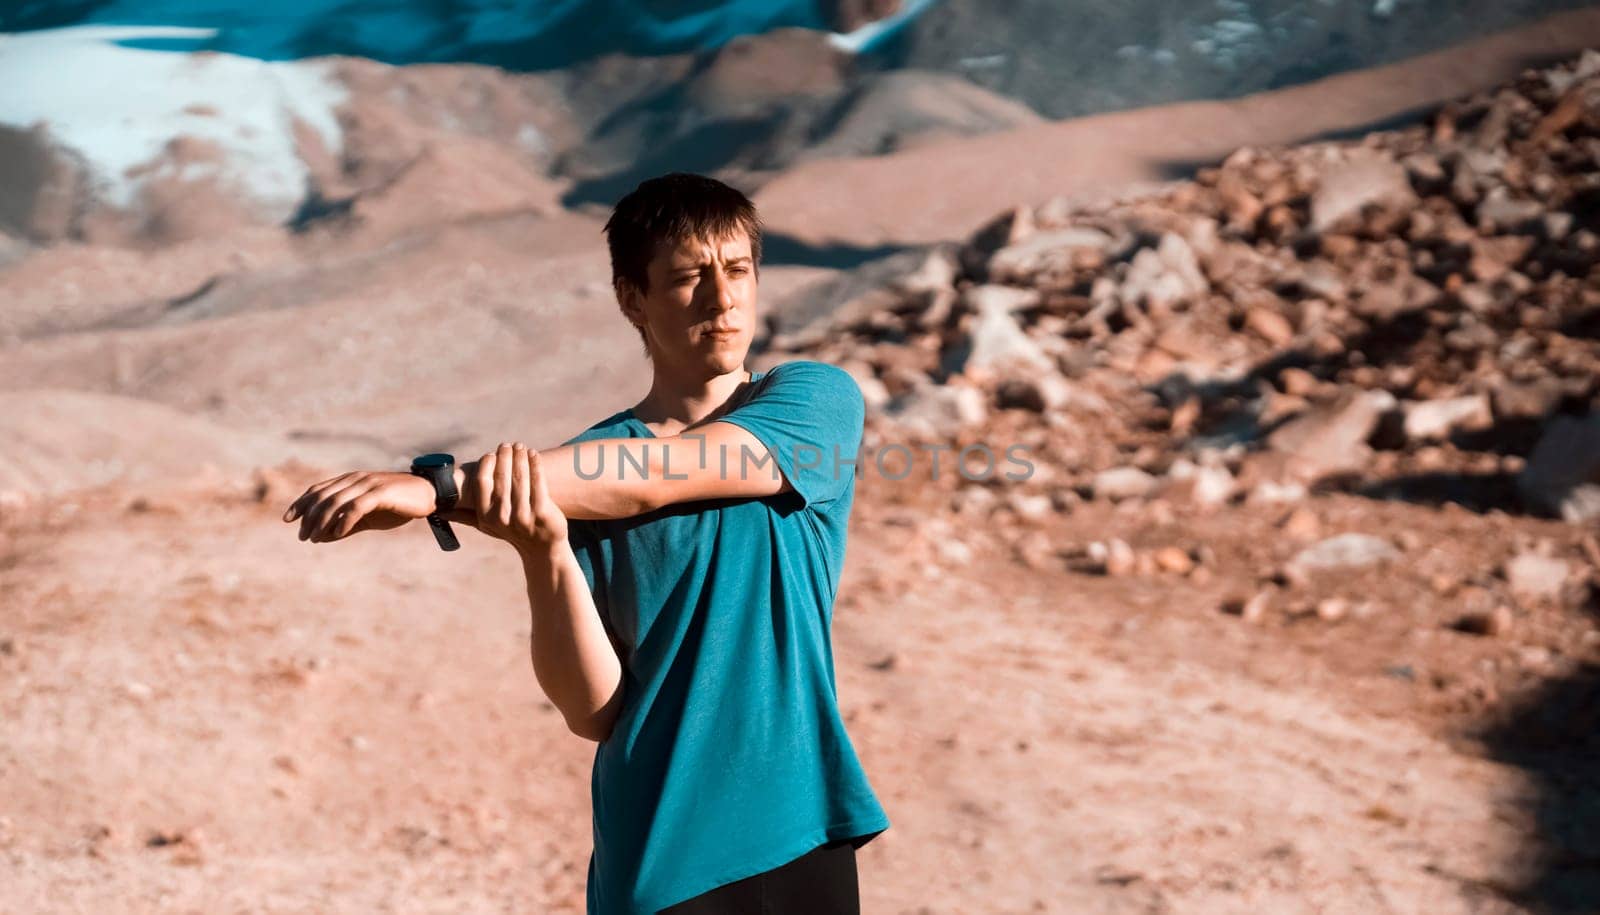 A young man does a warm-up before a trail and canyon race in the snow-capped mountains. The runner trains outdoor, does exercises in beautiful area.